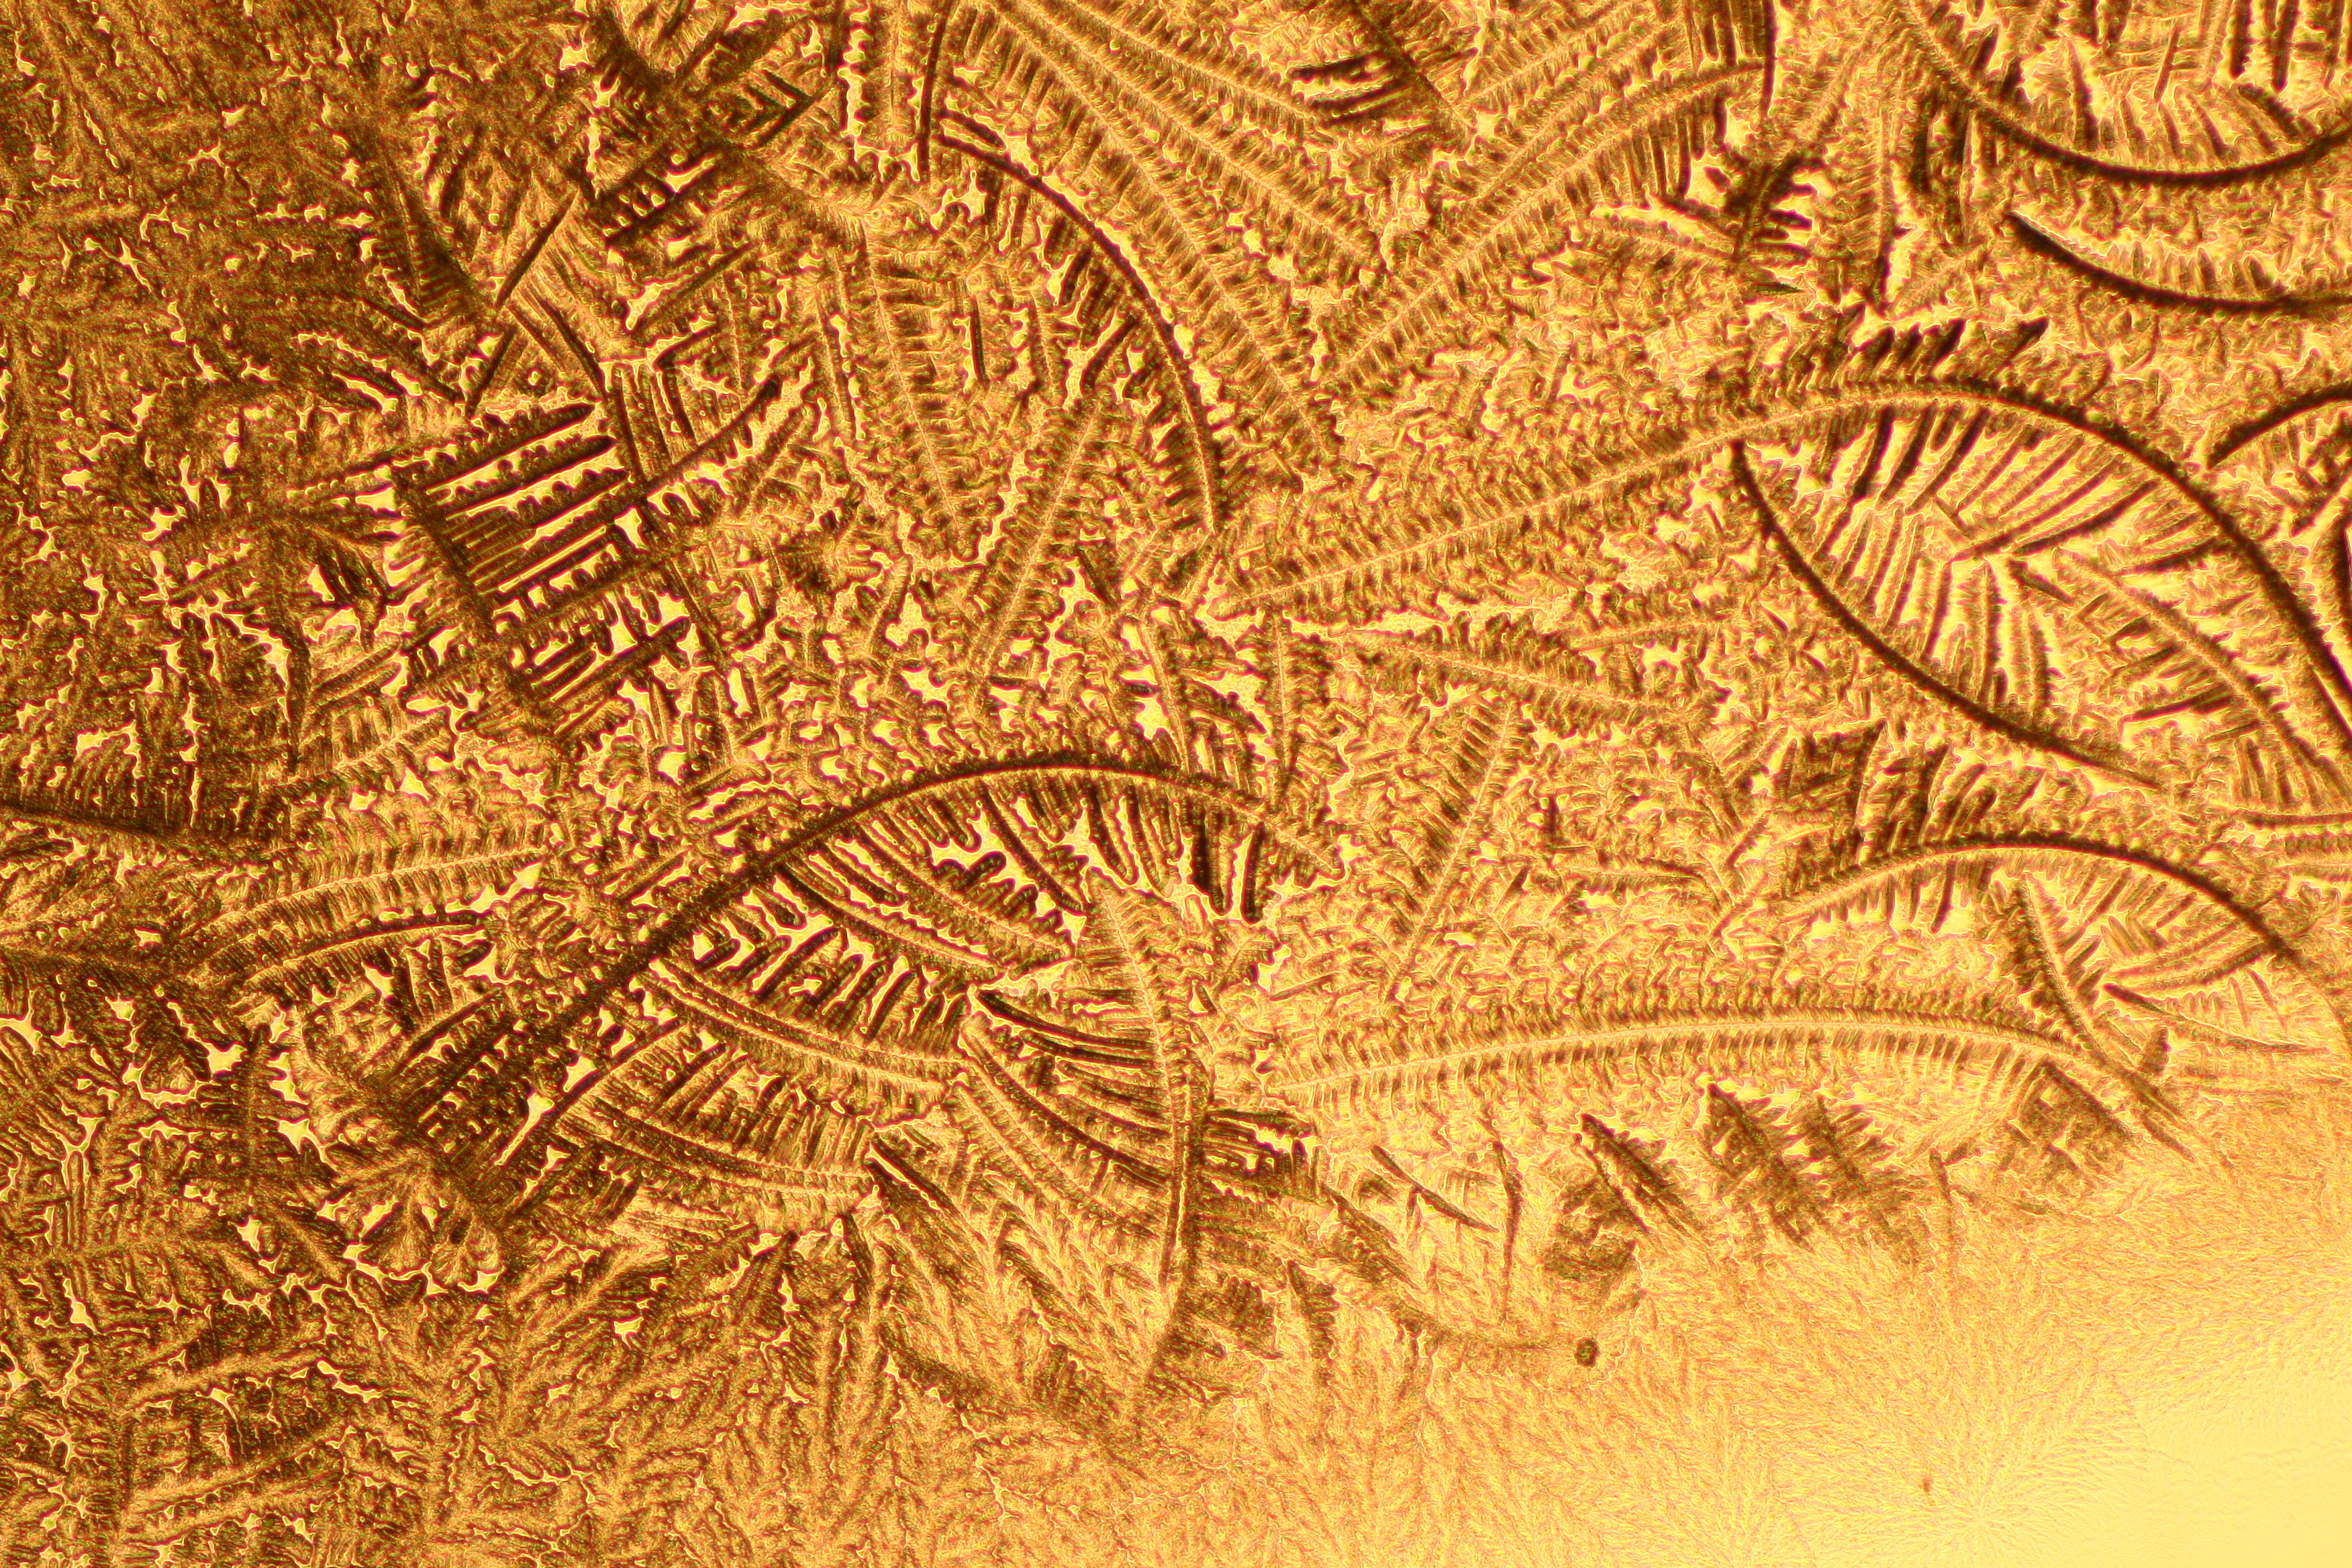 Image of crystallized salt after drying a hydrogel